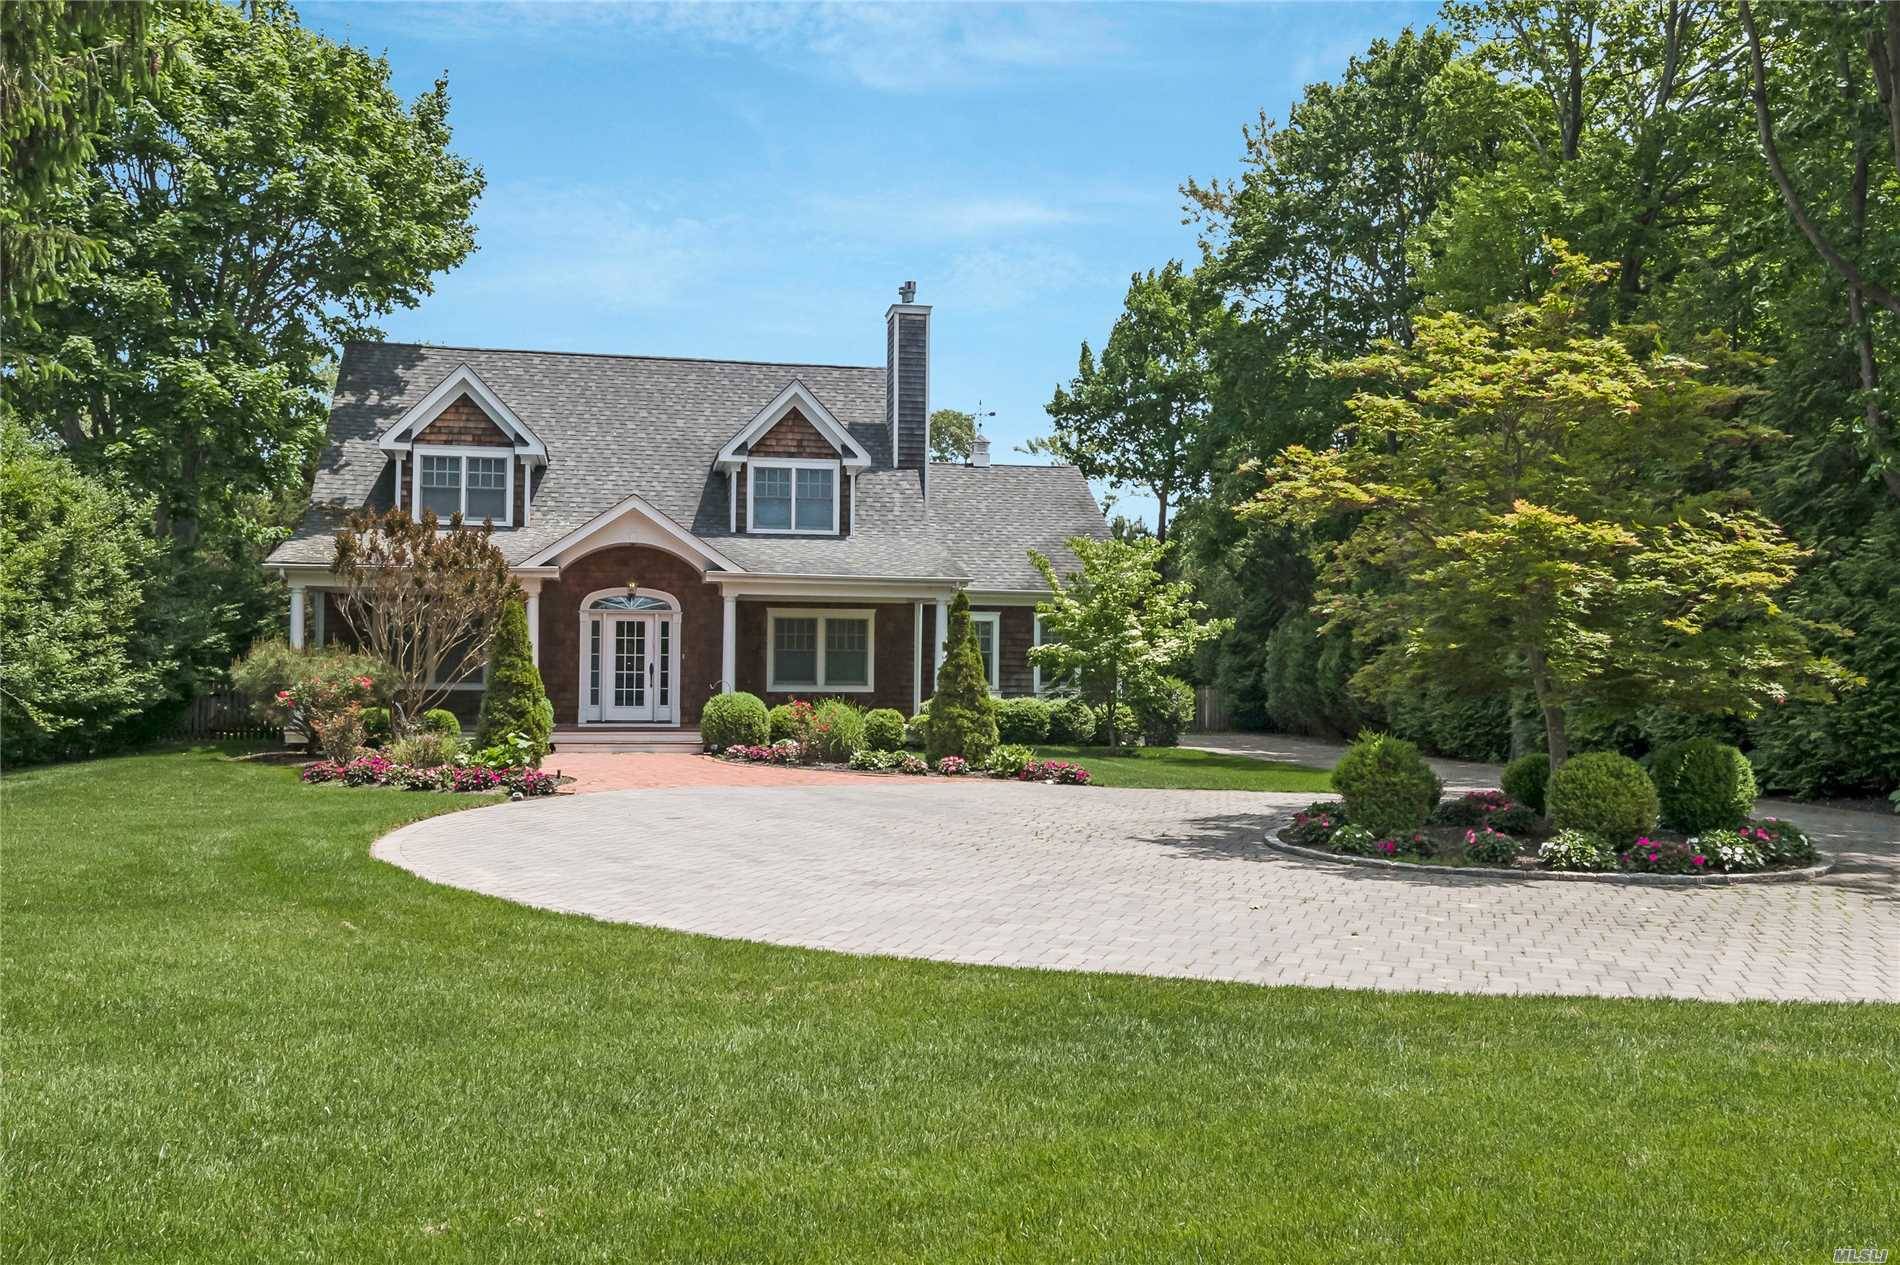 Beautifully Sited, Sizable Lot In The Heart Of Westhampton Beach Village, This Most Inviting 3 Br Home Is Hidden Behind Walls Of Lush Greenery.